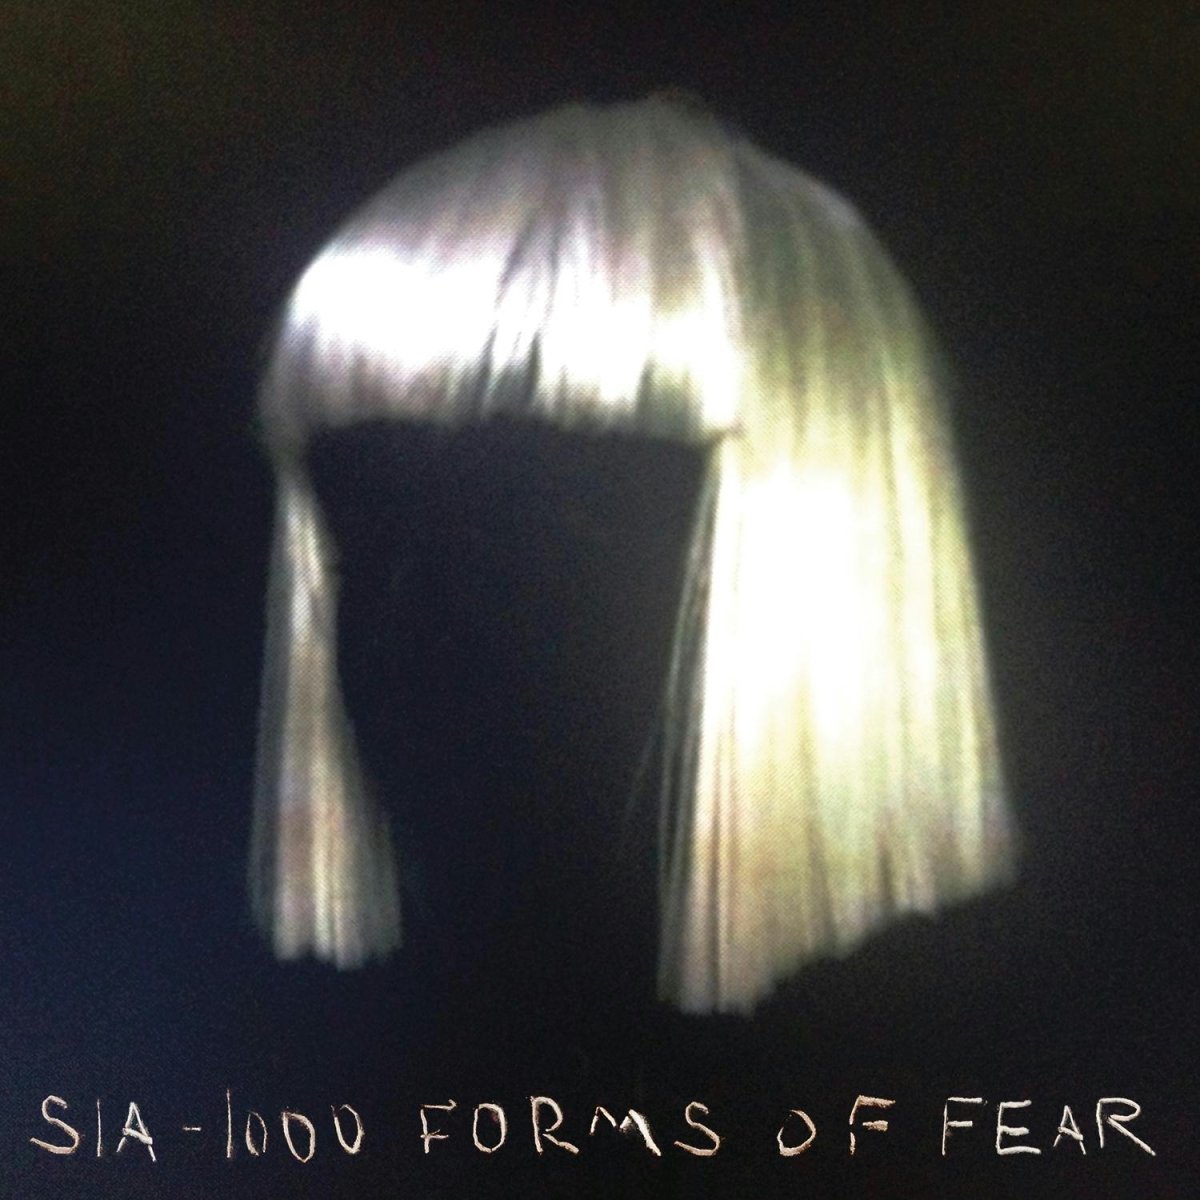 Sia has been working within the music industry for well over 25 years now, from debuting within a girl group to releasing several solo studio albums, with her most recent albums 1000 Forms of Fear and This Is Acting being her most popular, among with her side-project LSD.